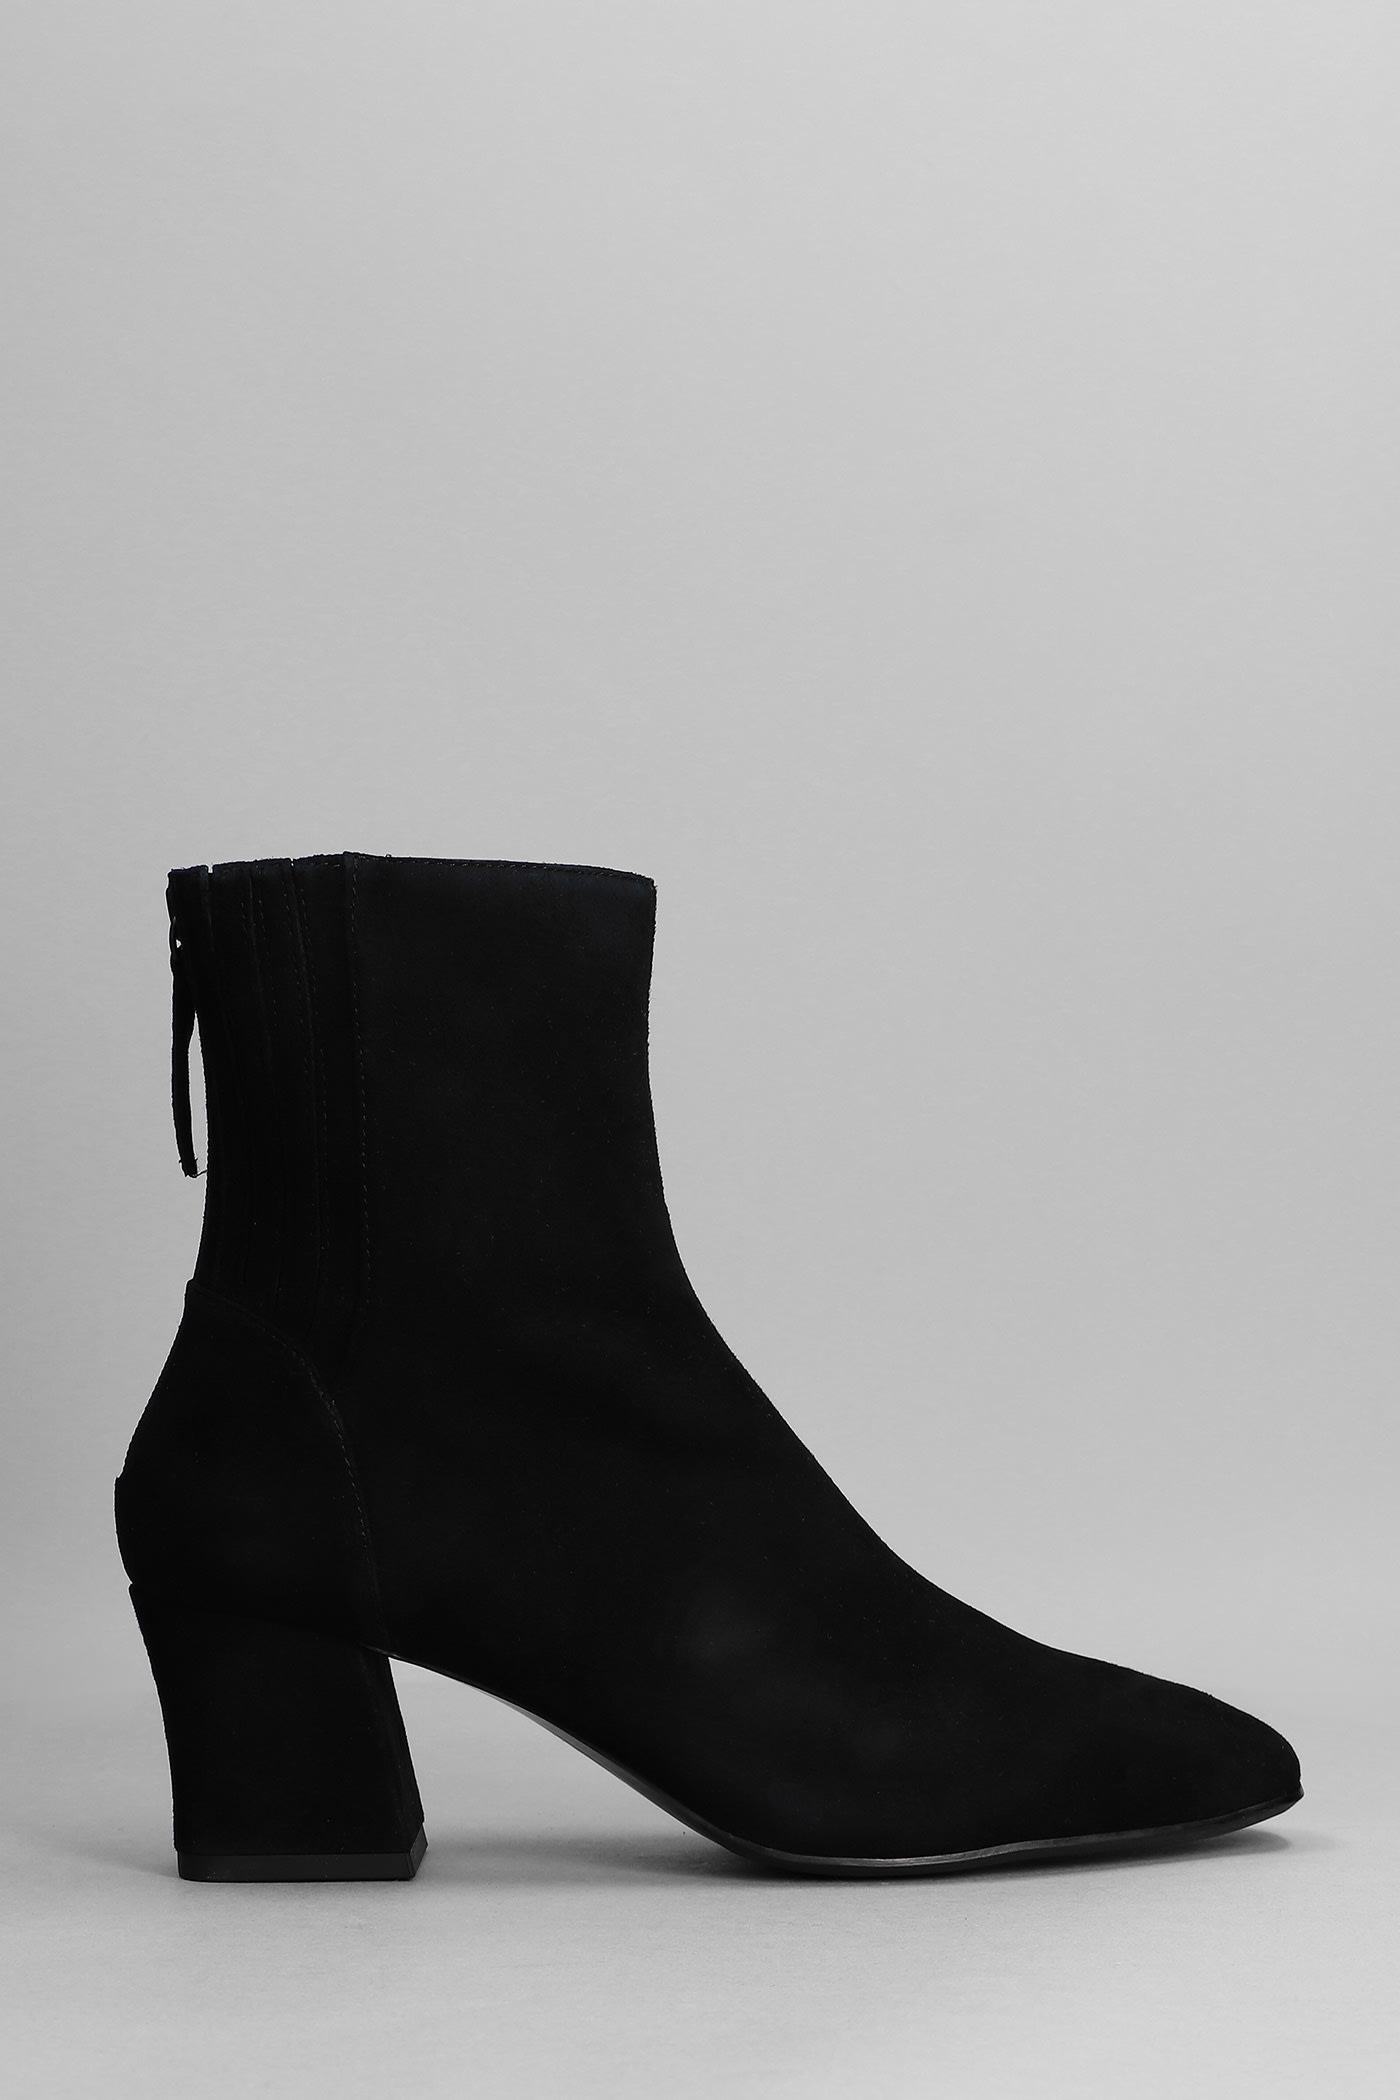 Ash Instant High Heels Ankle Boots In Black Suede